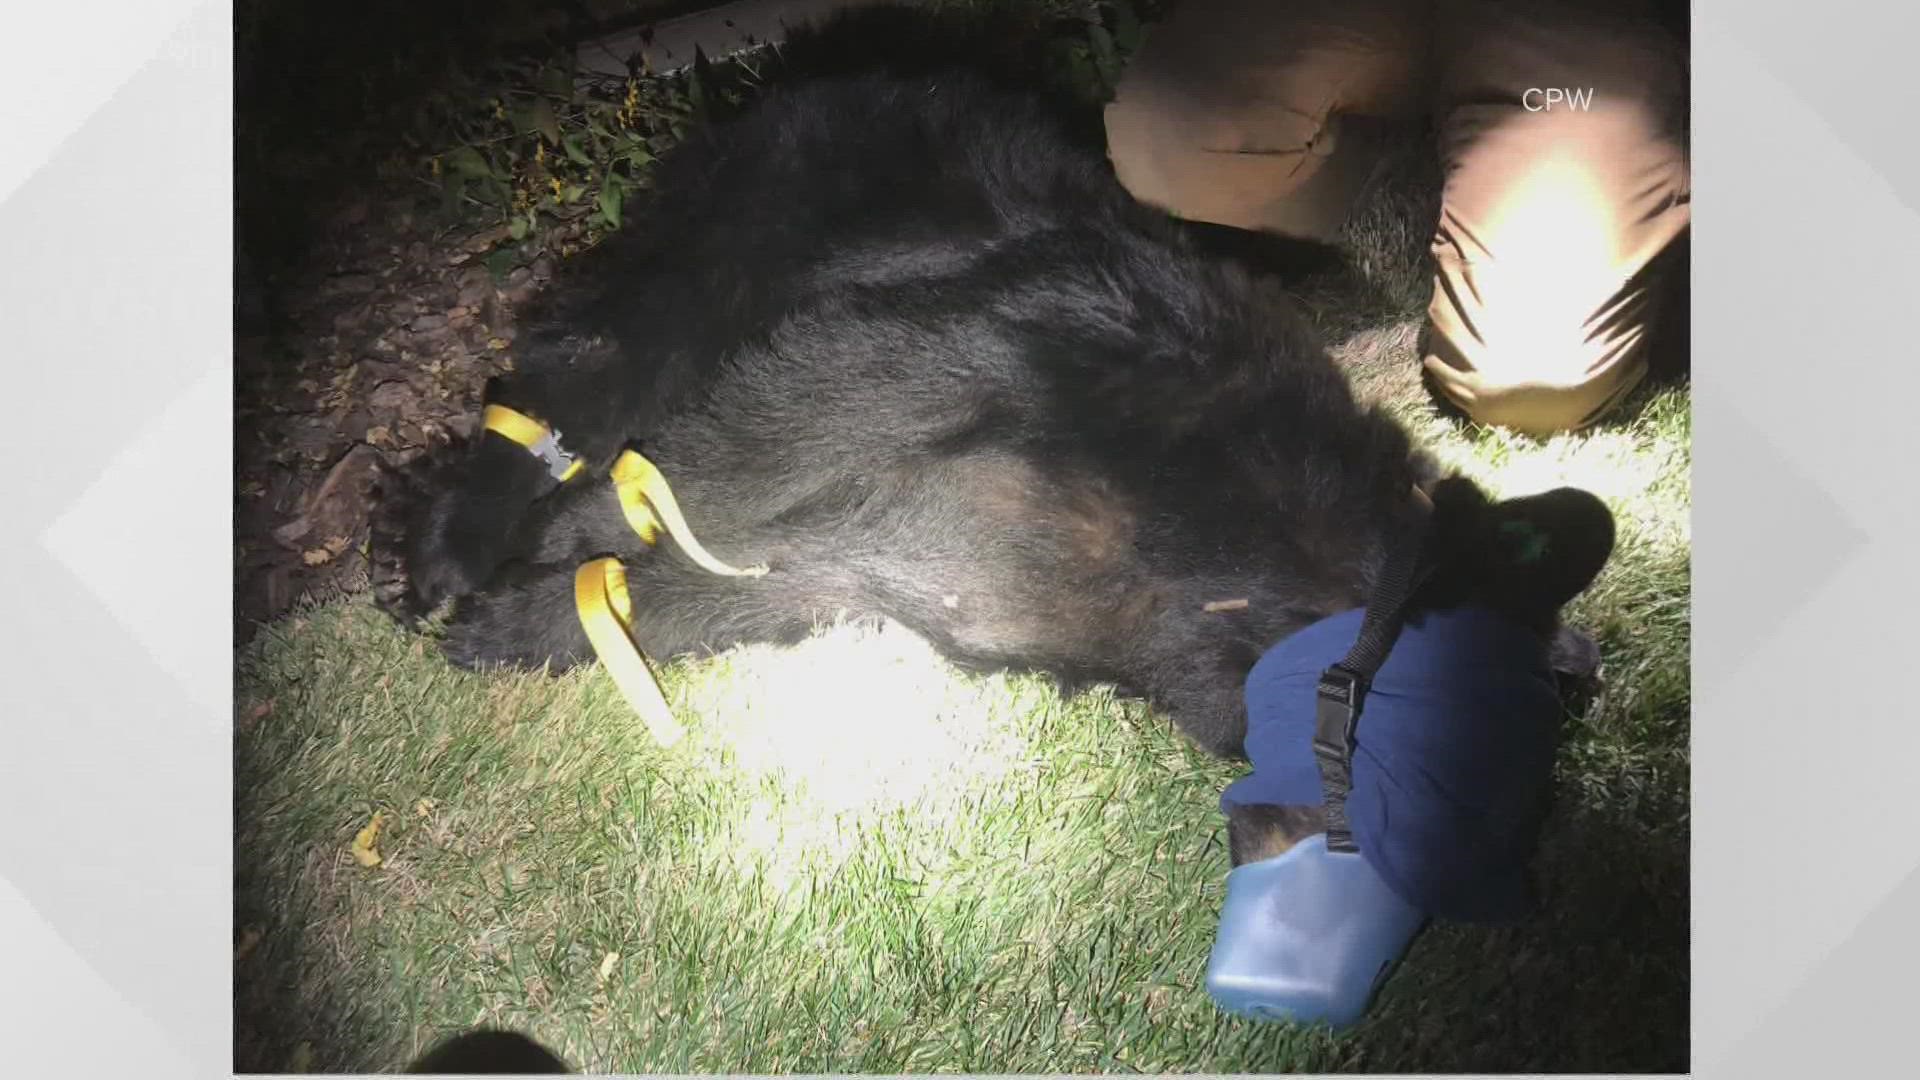 CPW said the bear was found in the 2400 block of South Jackson Street Friday night.